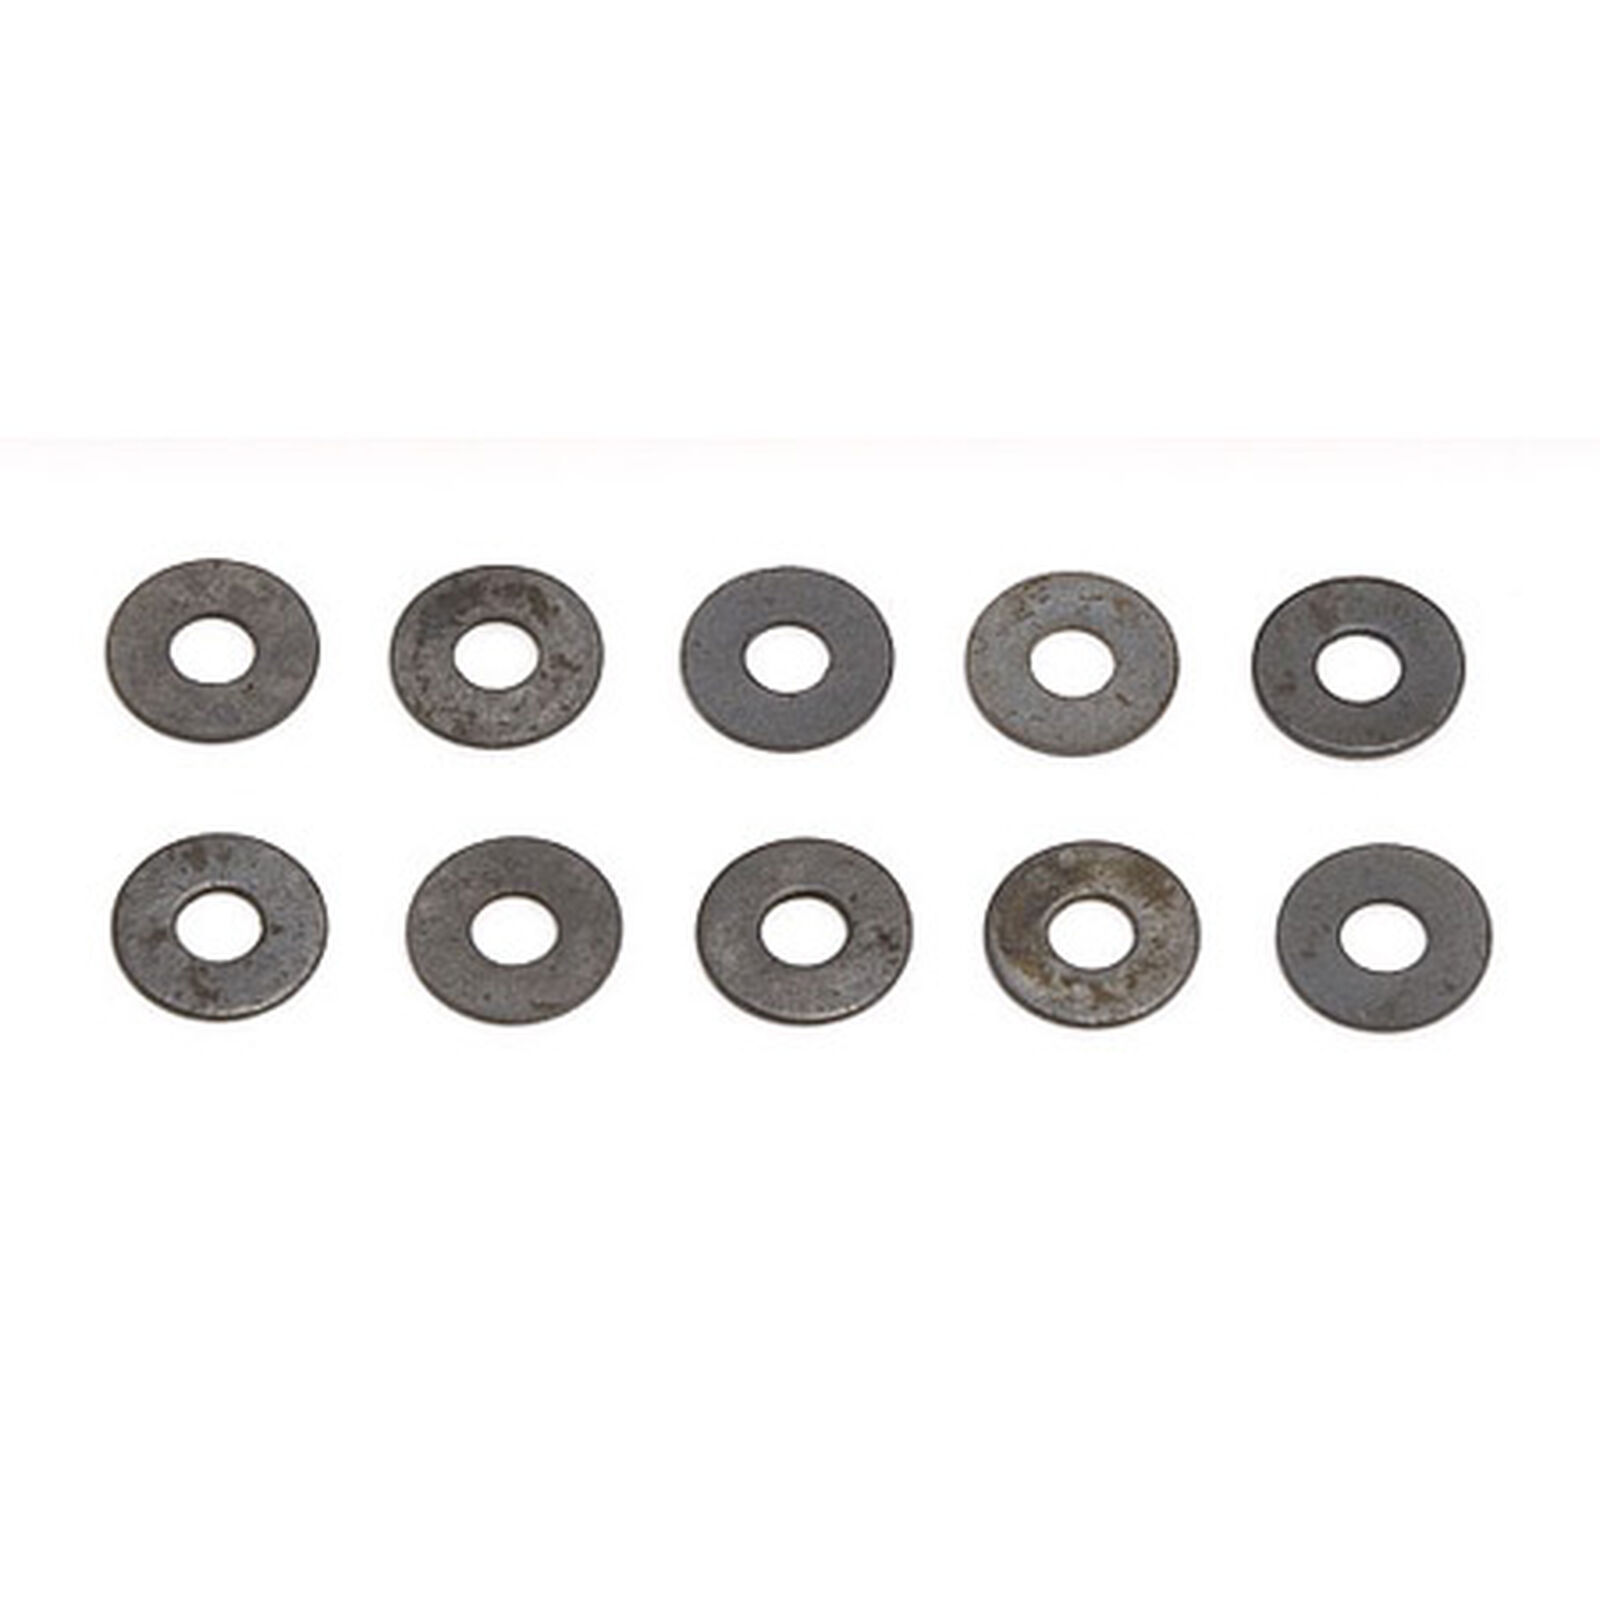 Washer 3 X 8mm (10)